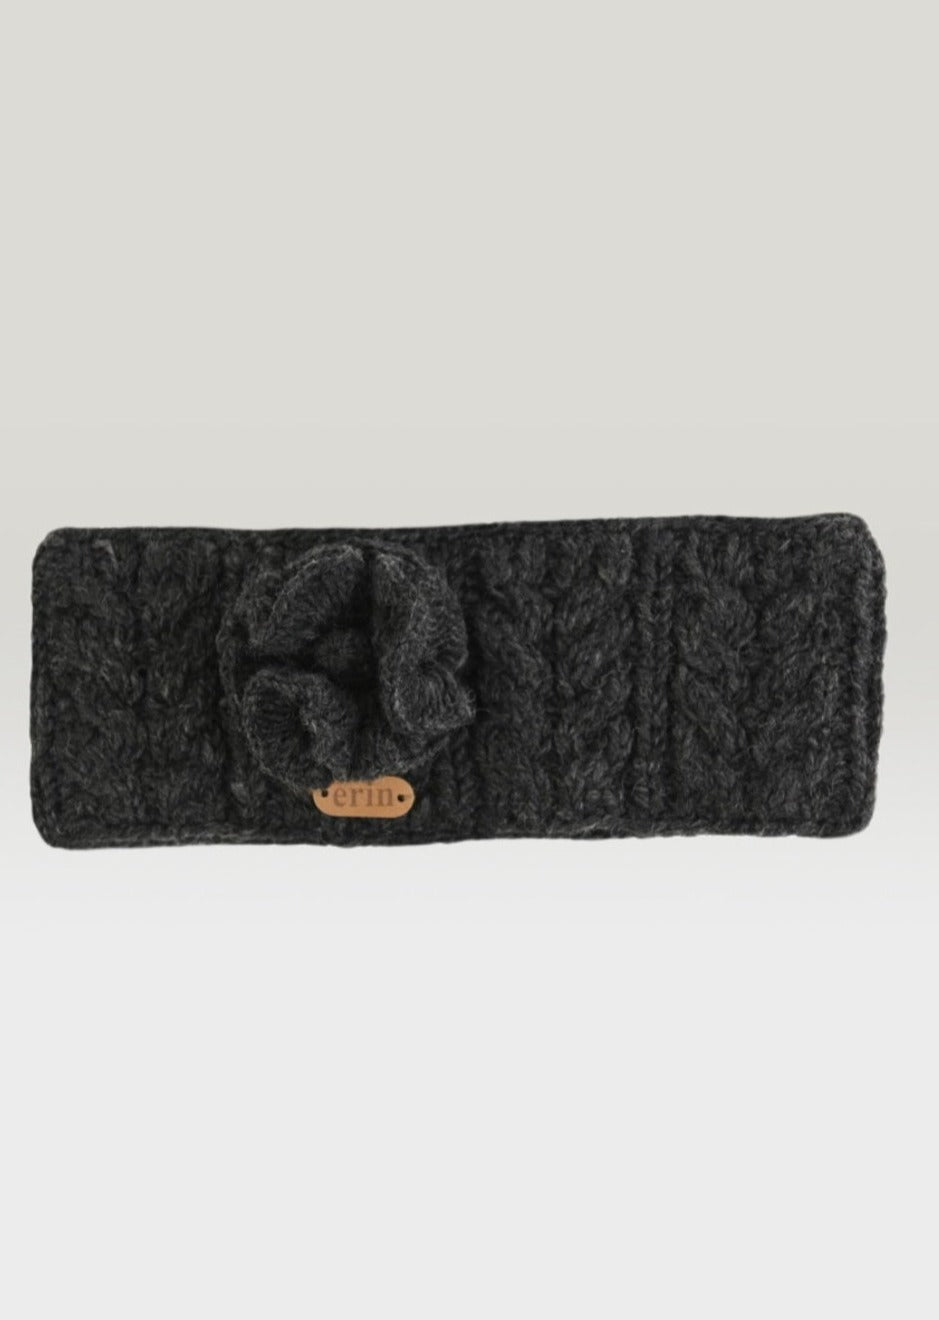 Aran Cable Knitted Wool Flower Headband | Charcoal